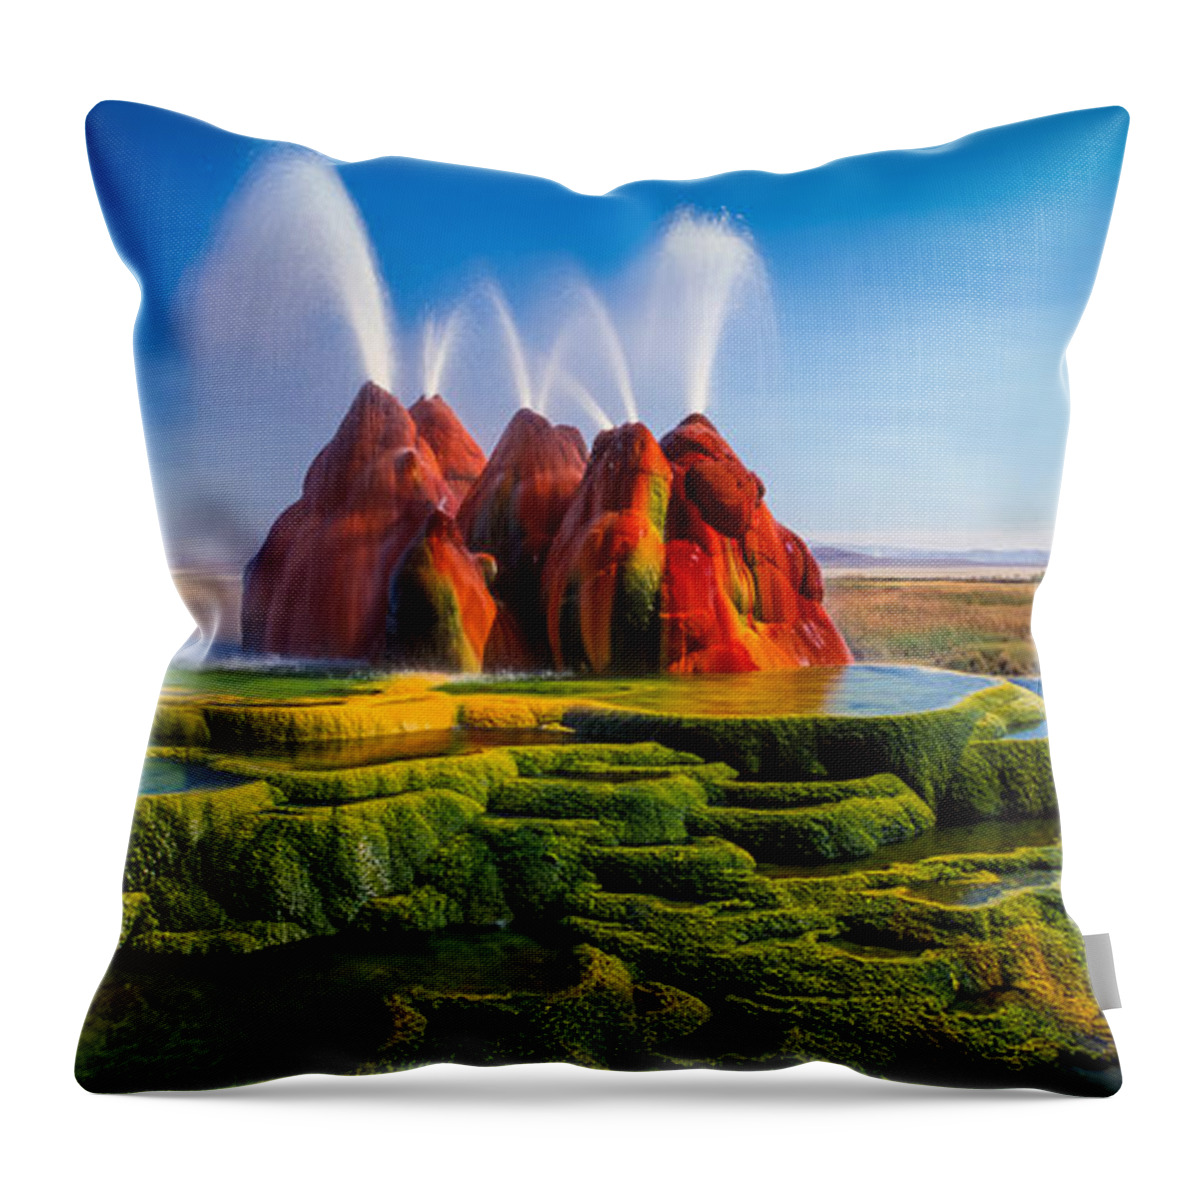 America Throw Pillow featuring the photograph Fly Geyser Panorama by Inge Johnsson